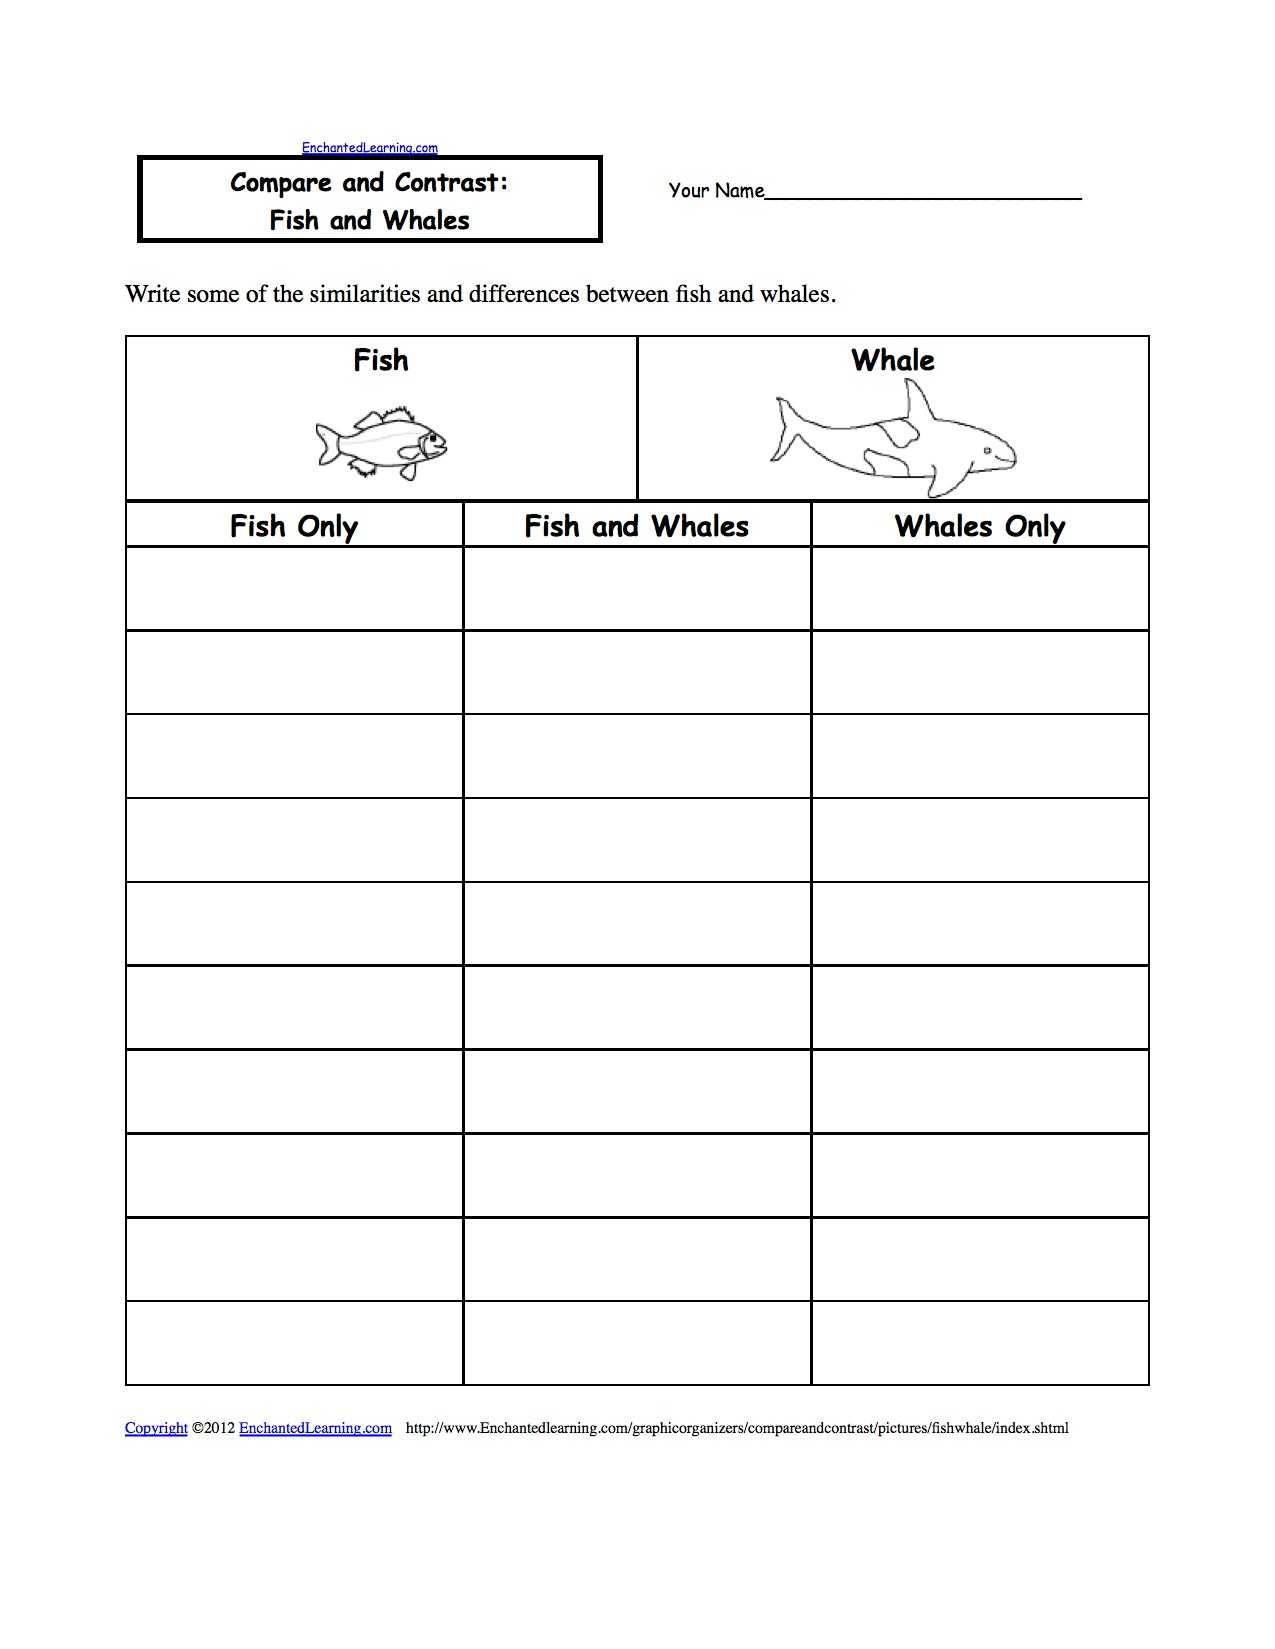 Cell Parts and Functions Worksheet Answers Along with Paring Plant and Animal Cells Venn Diagram Worksheet Answers